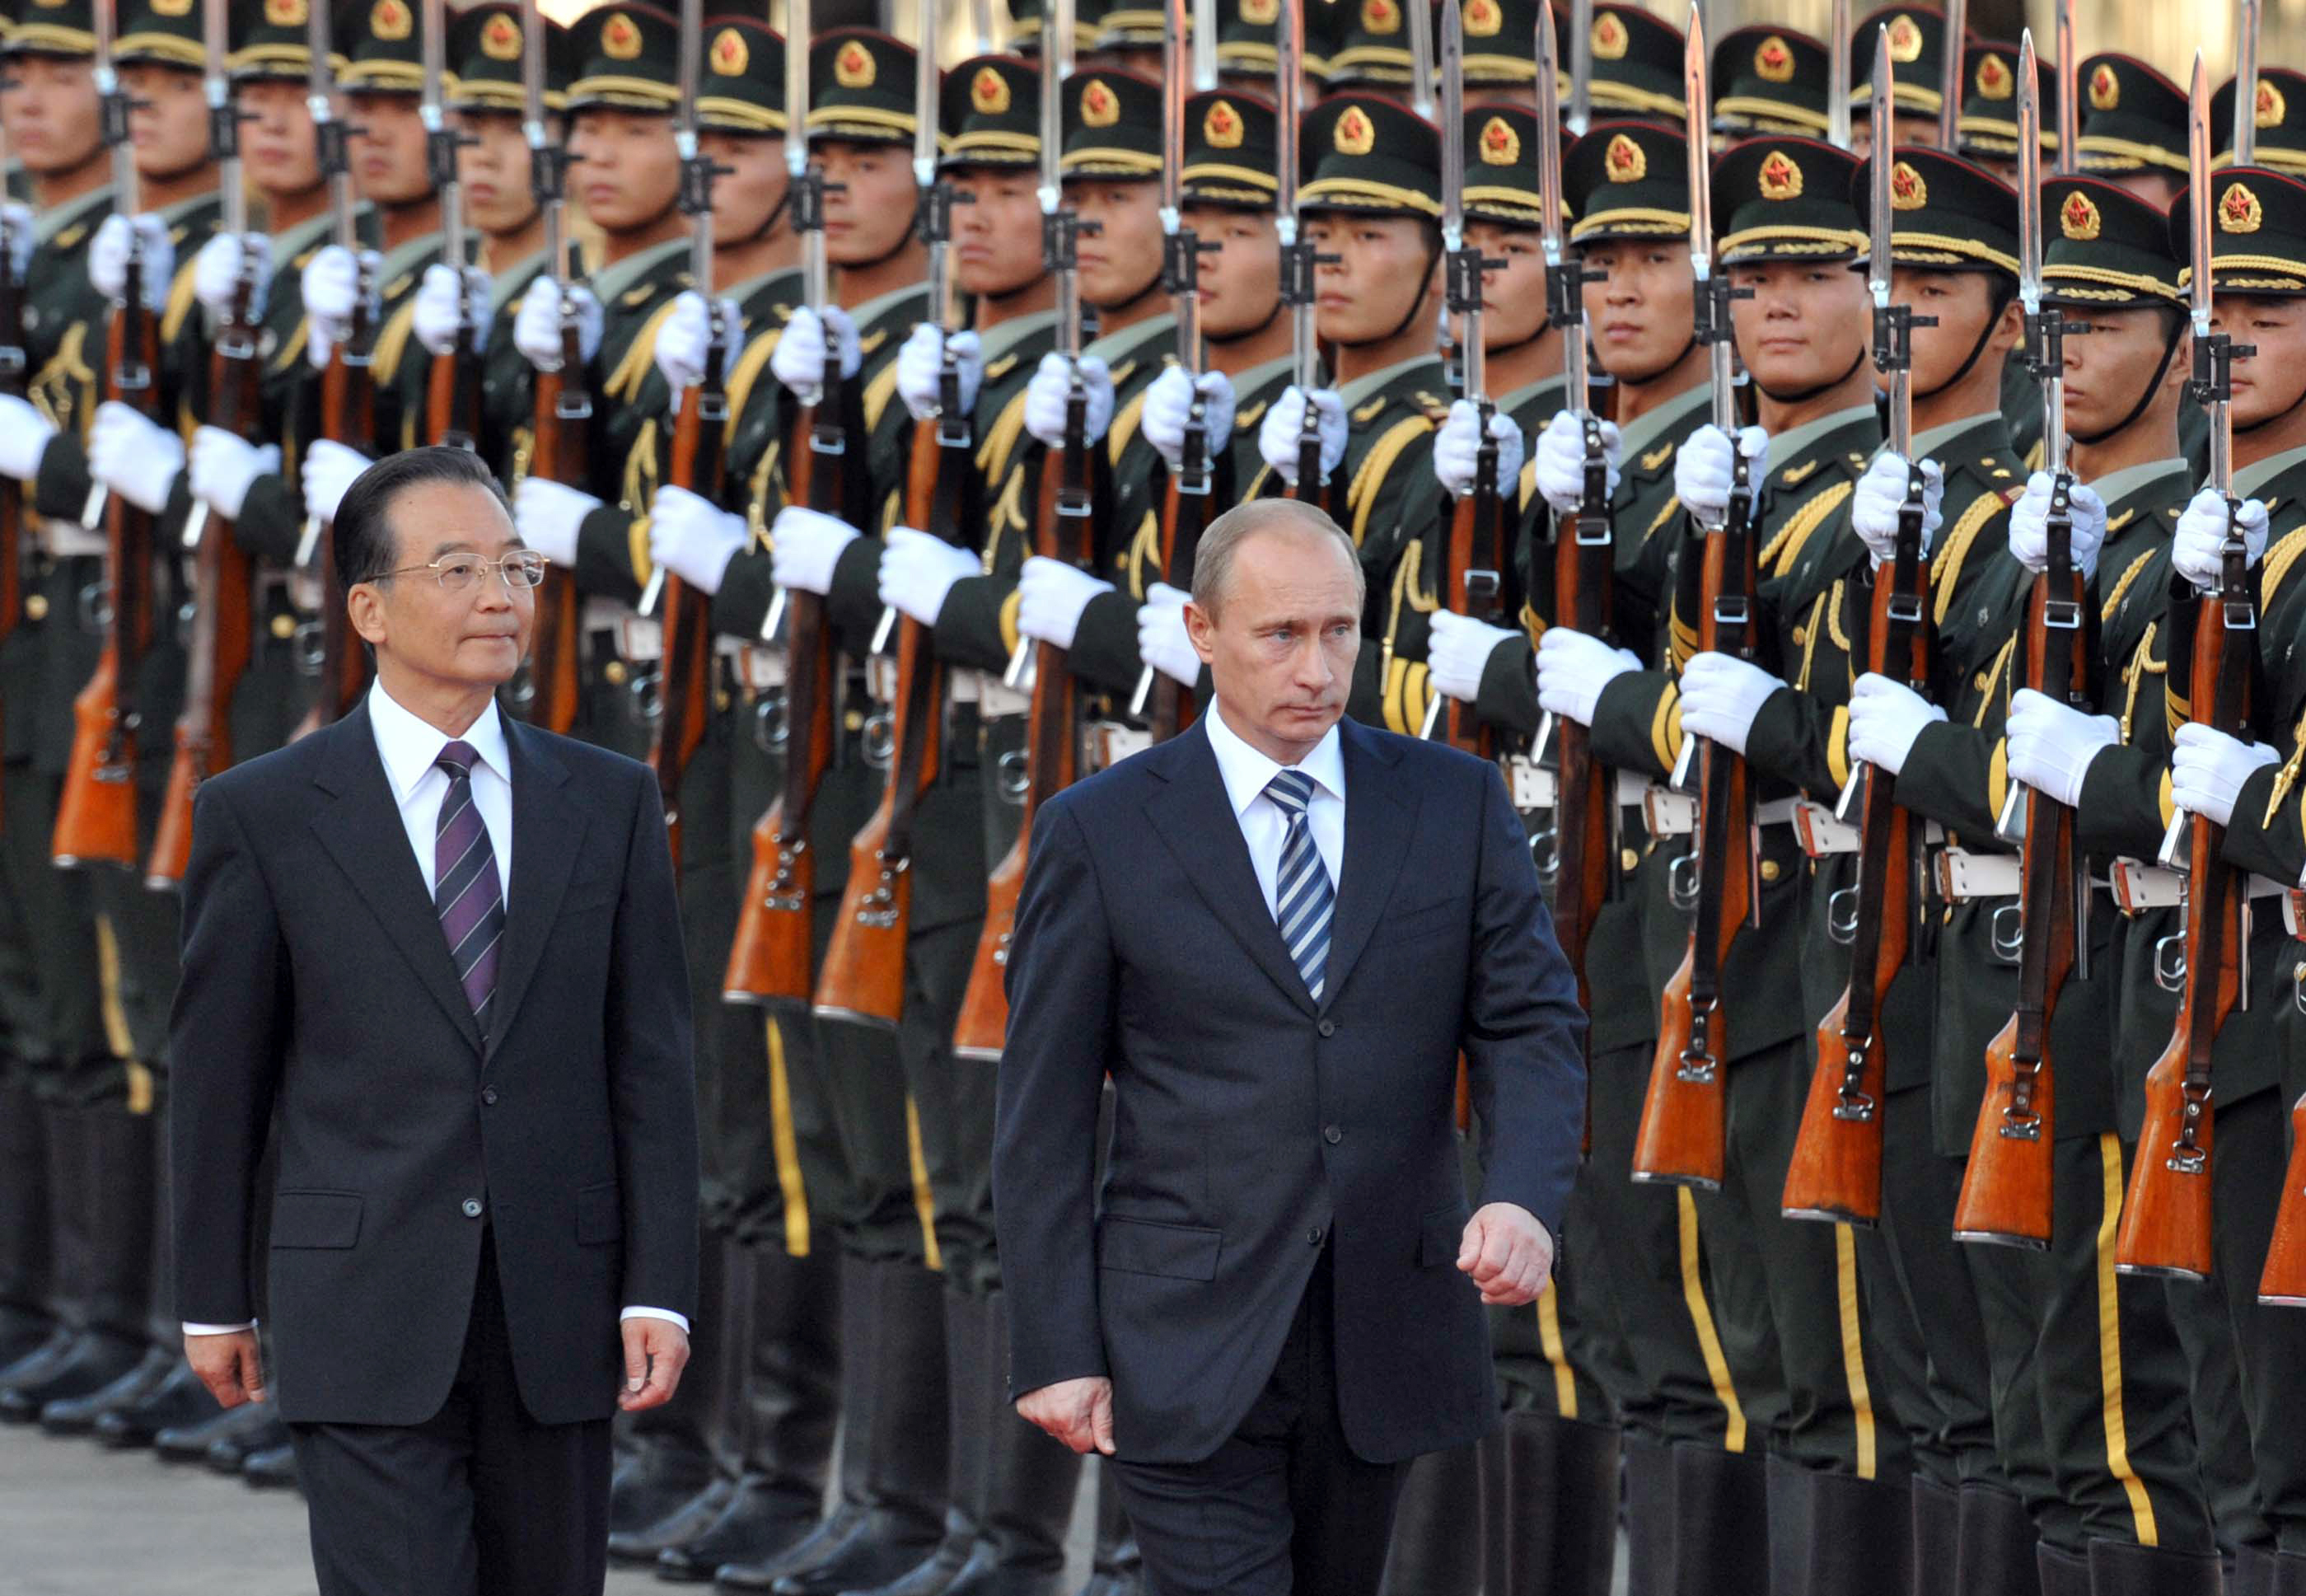 Russian Prime Minister Vladimir Putin walks with Chinese Premier Wen Jiabao past a military honour guard during a welcome ceremony at the Great Hall of the People in Beijing on October 13, 2009. 